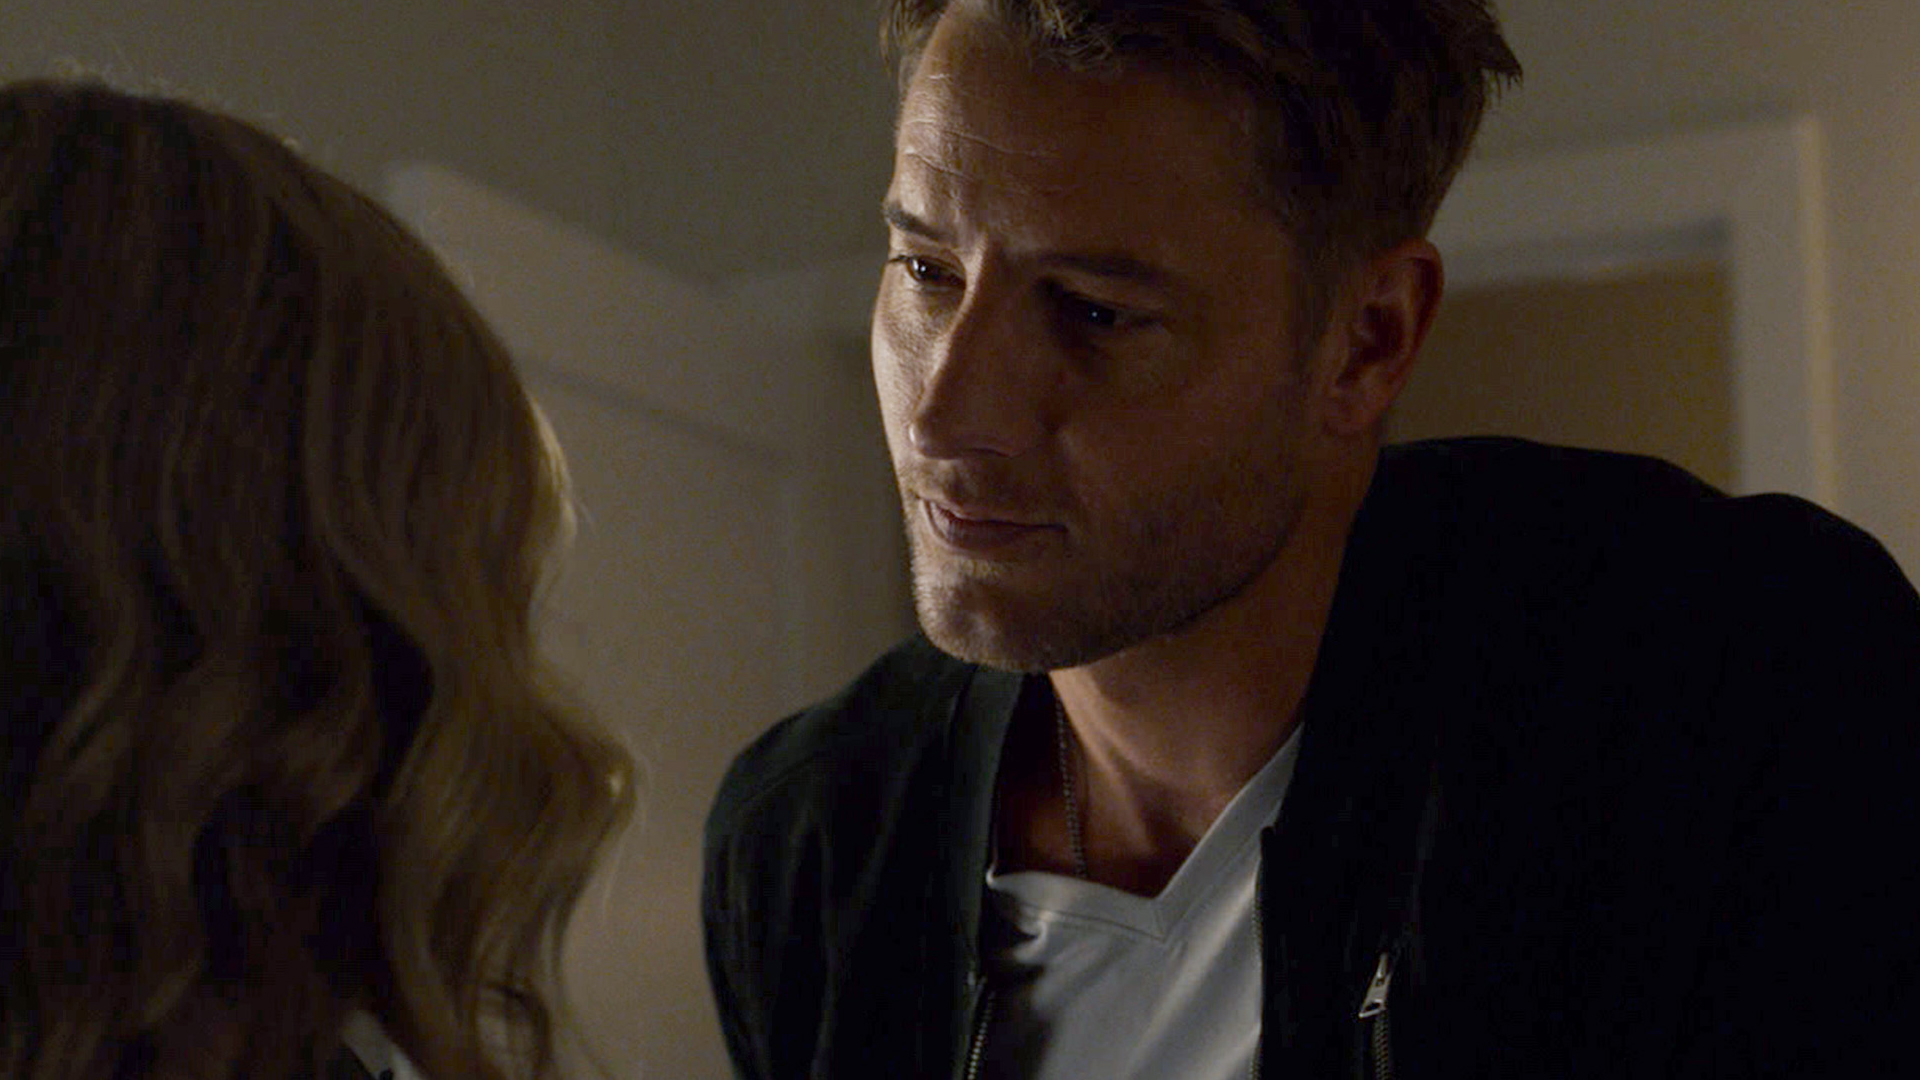 Justin Hartley as Kevin Pearson looks at Caitlin Thompson as Madison Simmons in ‘This Is Us’ Season 5 Episode 14, ‘The Music and the Mirror.’